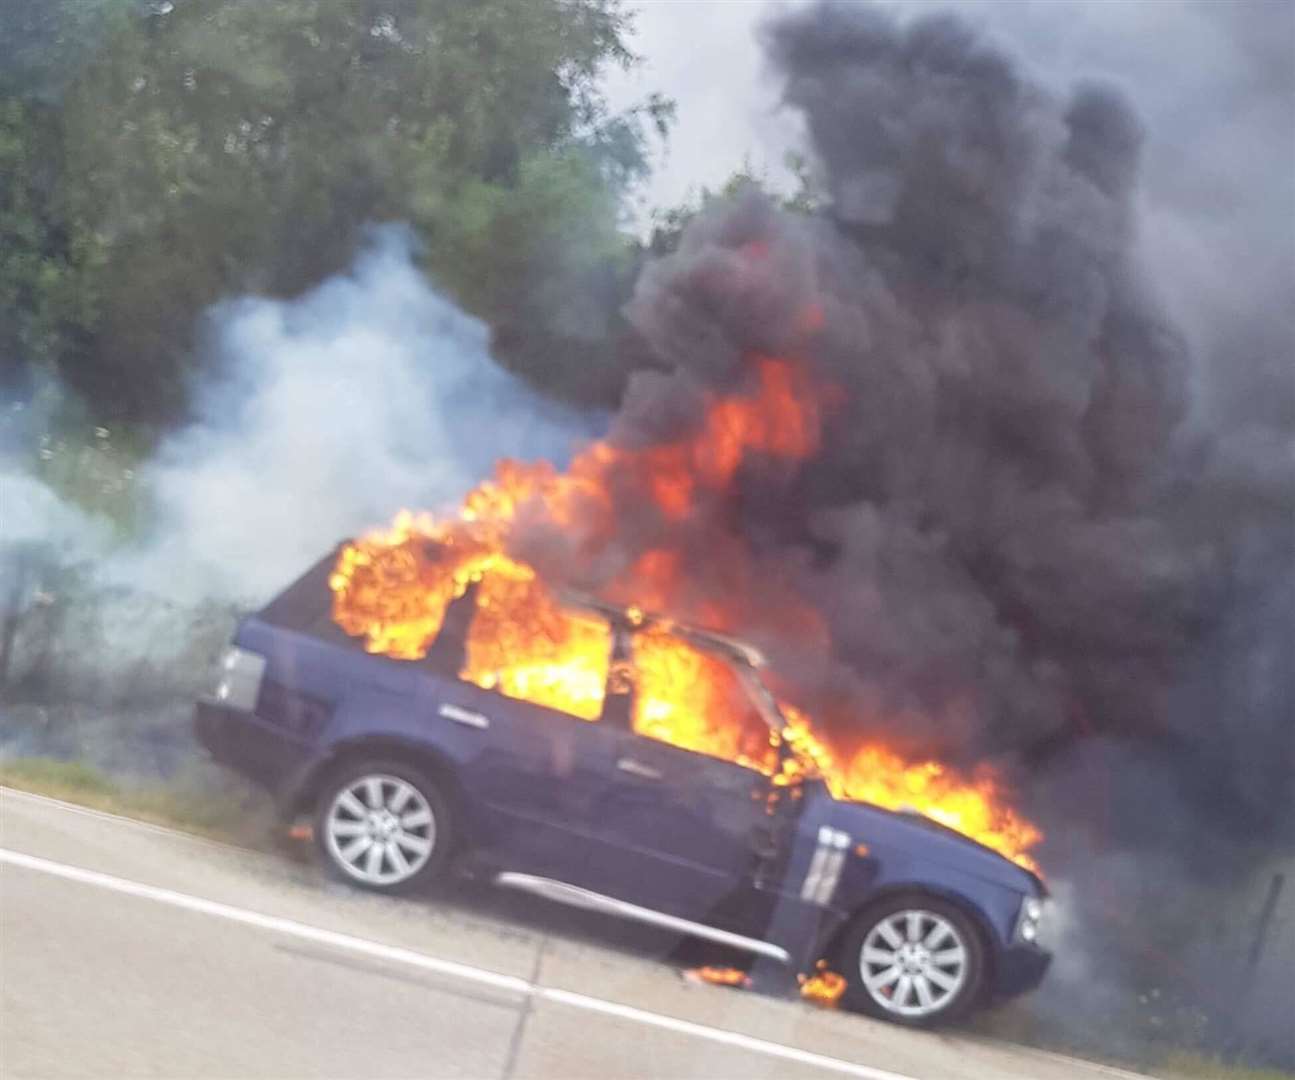 A section of the M20 is closed due to the burning Range Rover (14030048)